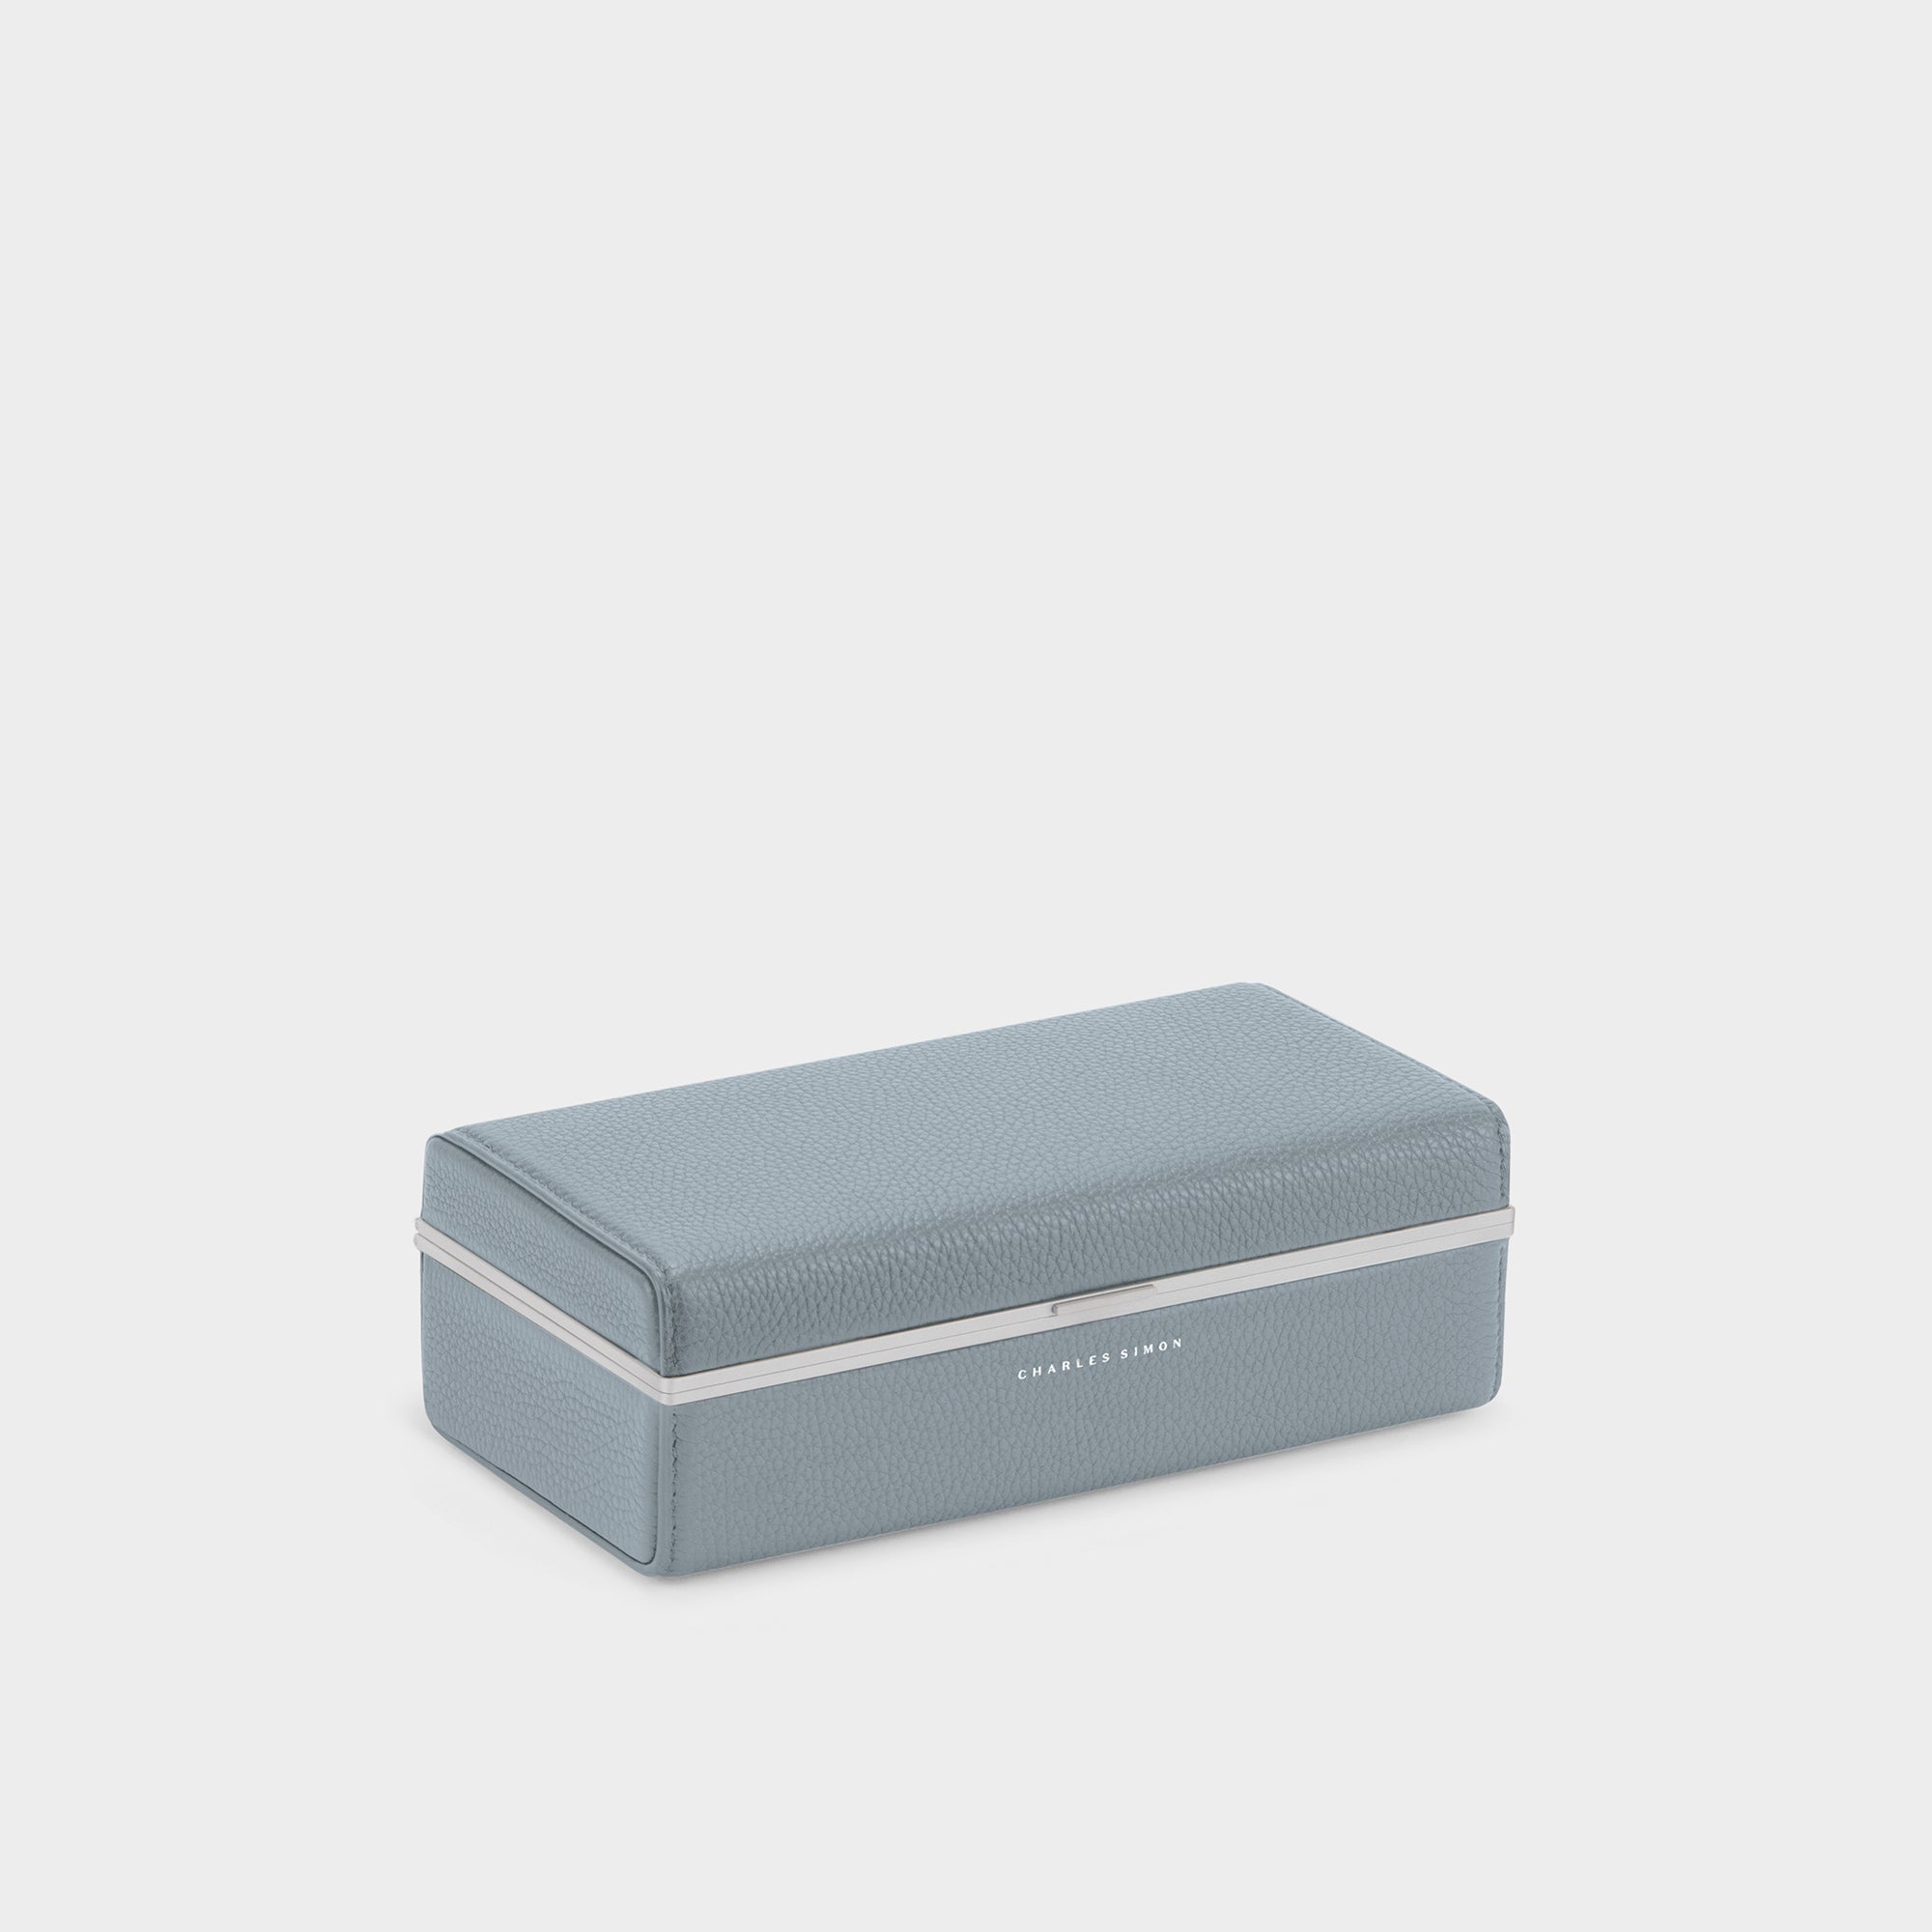 Charles Simon watch case made from cloud grey French leather, anodized aluminum and Alcantara interior lining